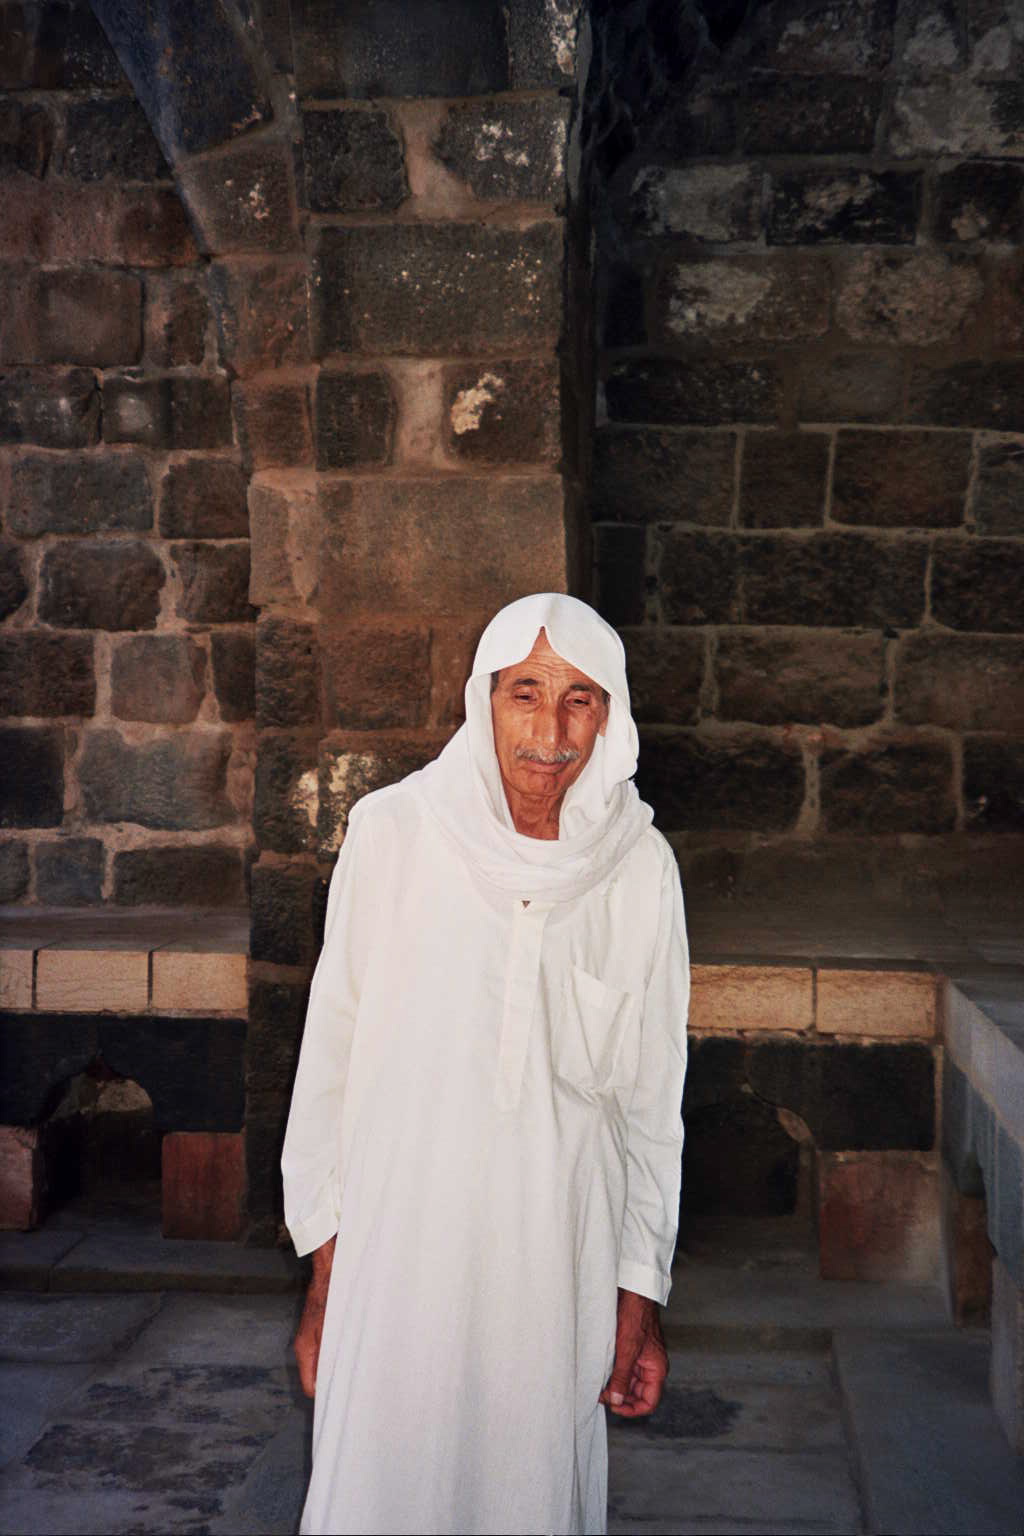 a old man dressed in white standing by some steps